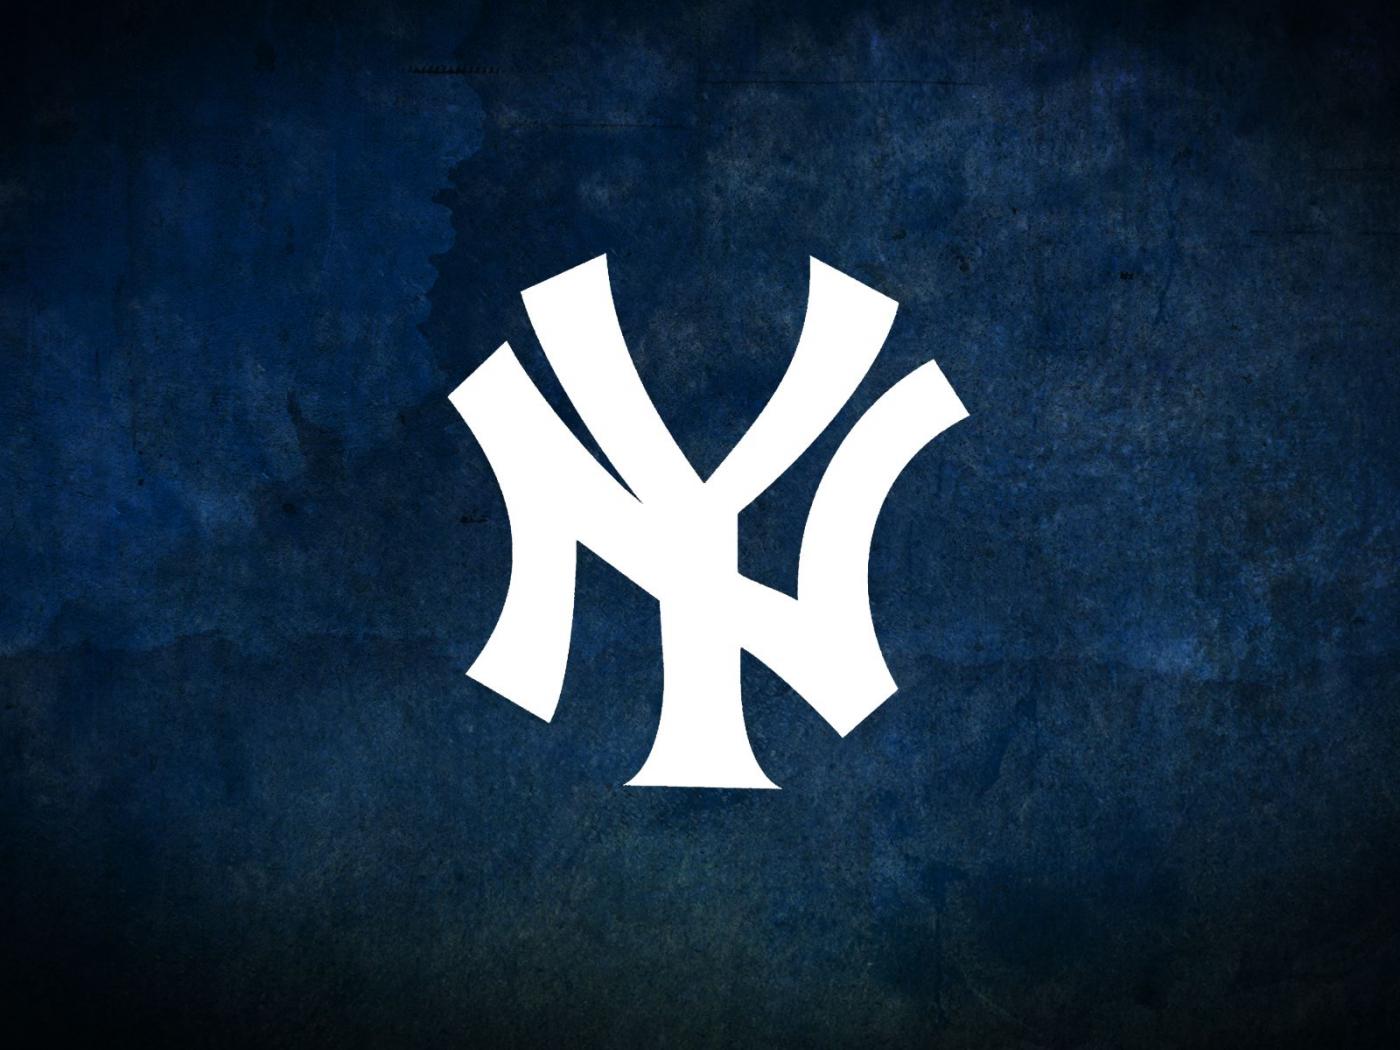 About New York Yankees Or Even Videos Related To